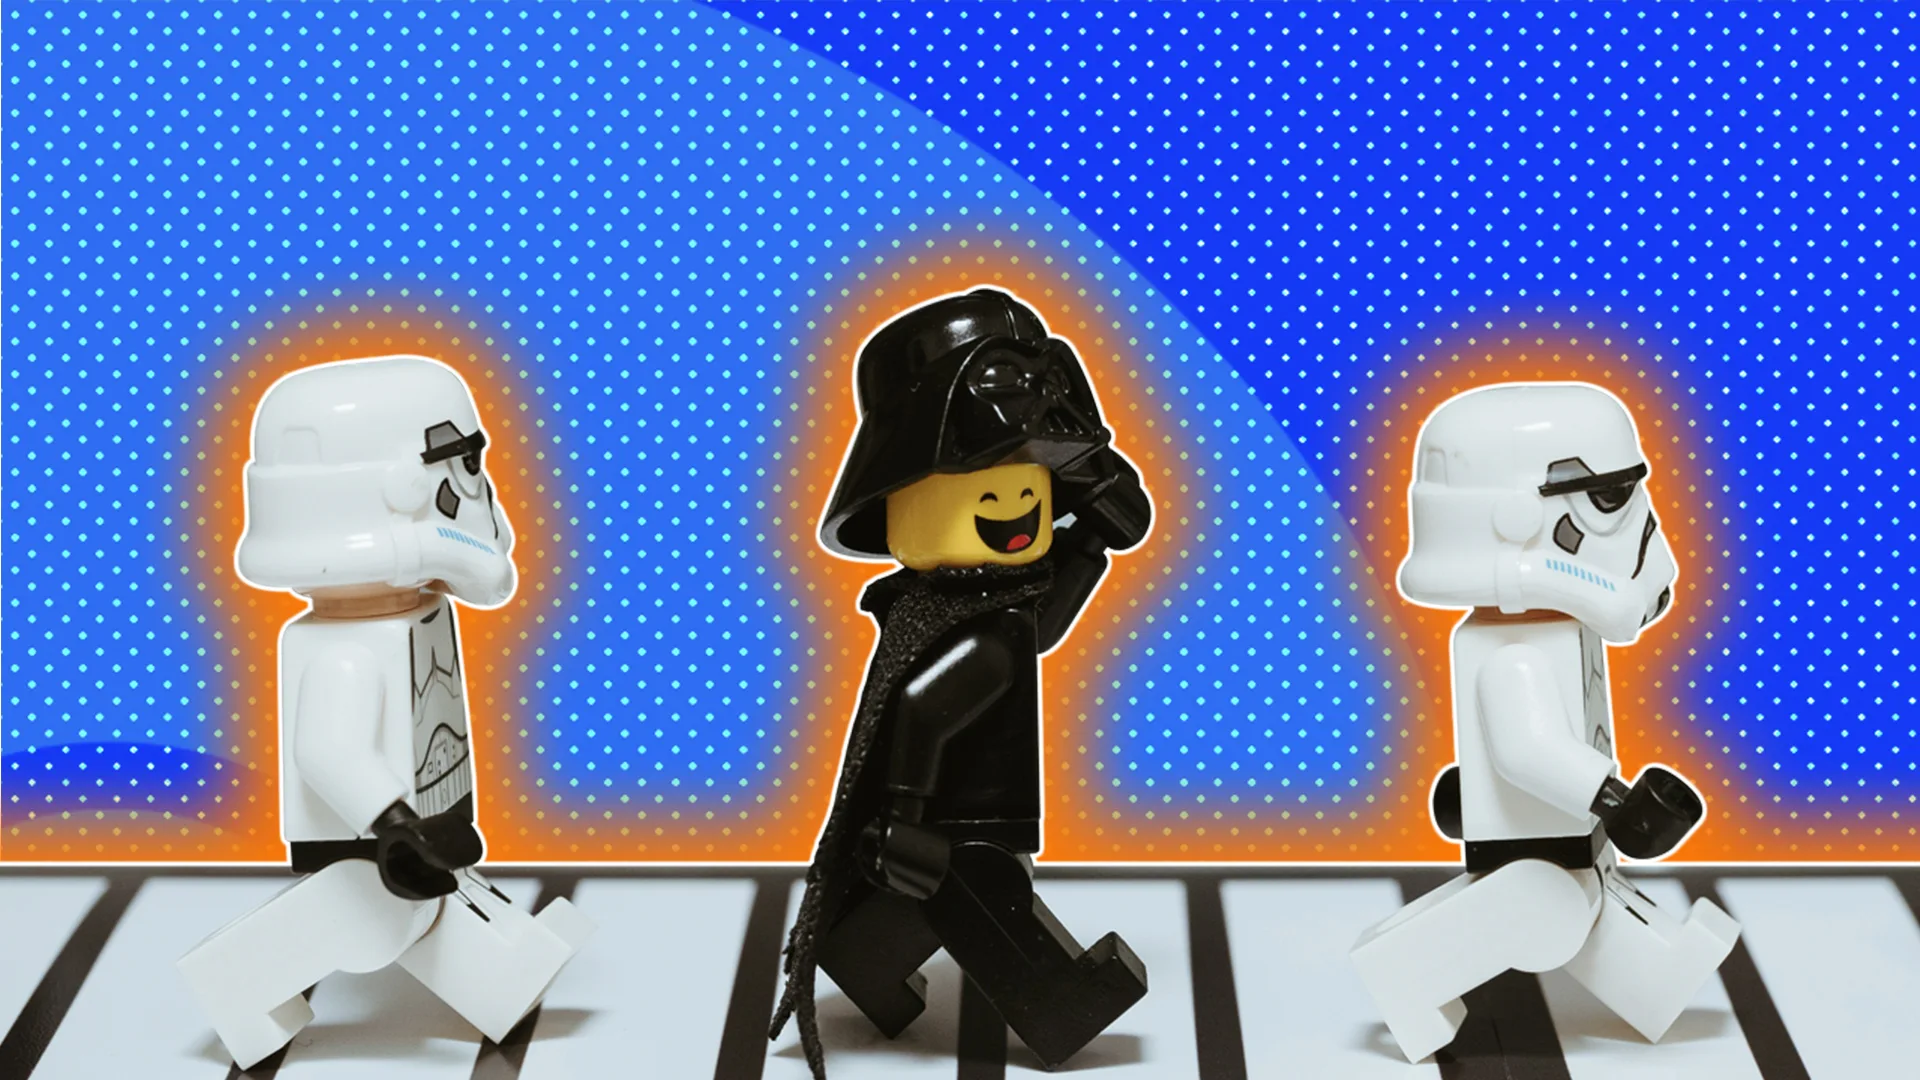 Lego Star Wars characters crossing the road - in graphic house style